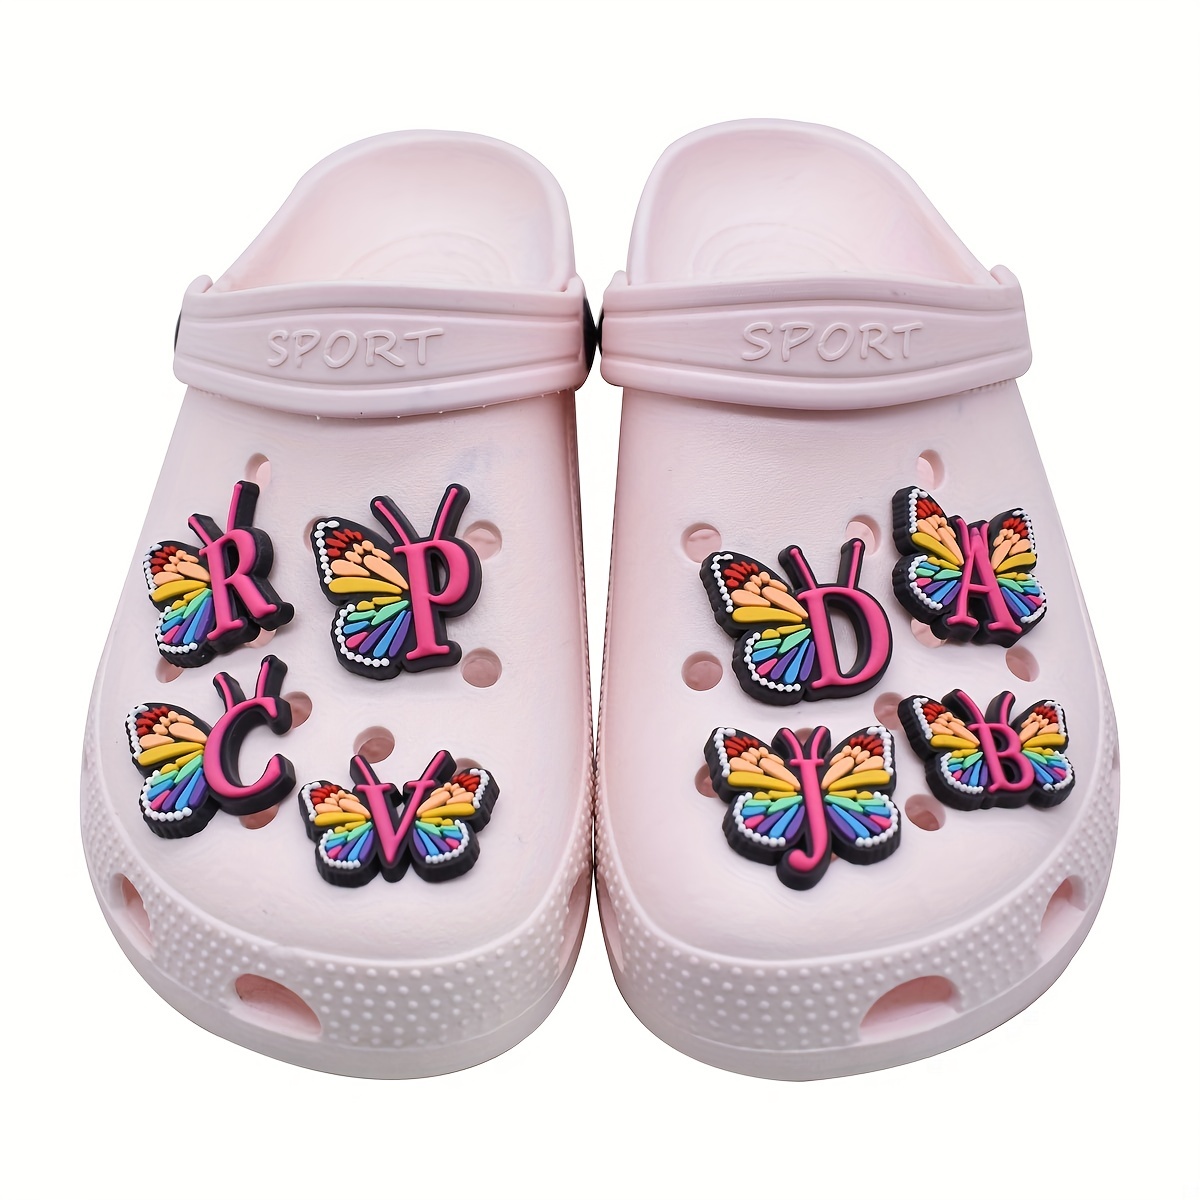 One piece of single letter shoe decoration, fashionable and cute clog  accessories that can be mixed and matched freely.